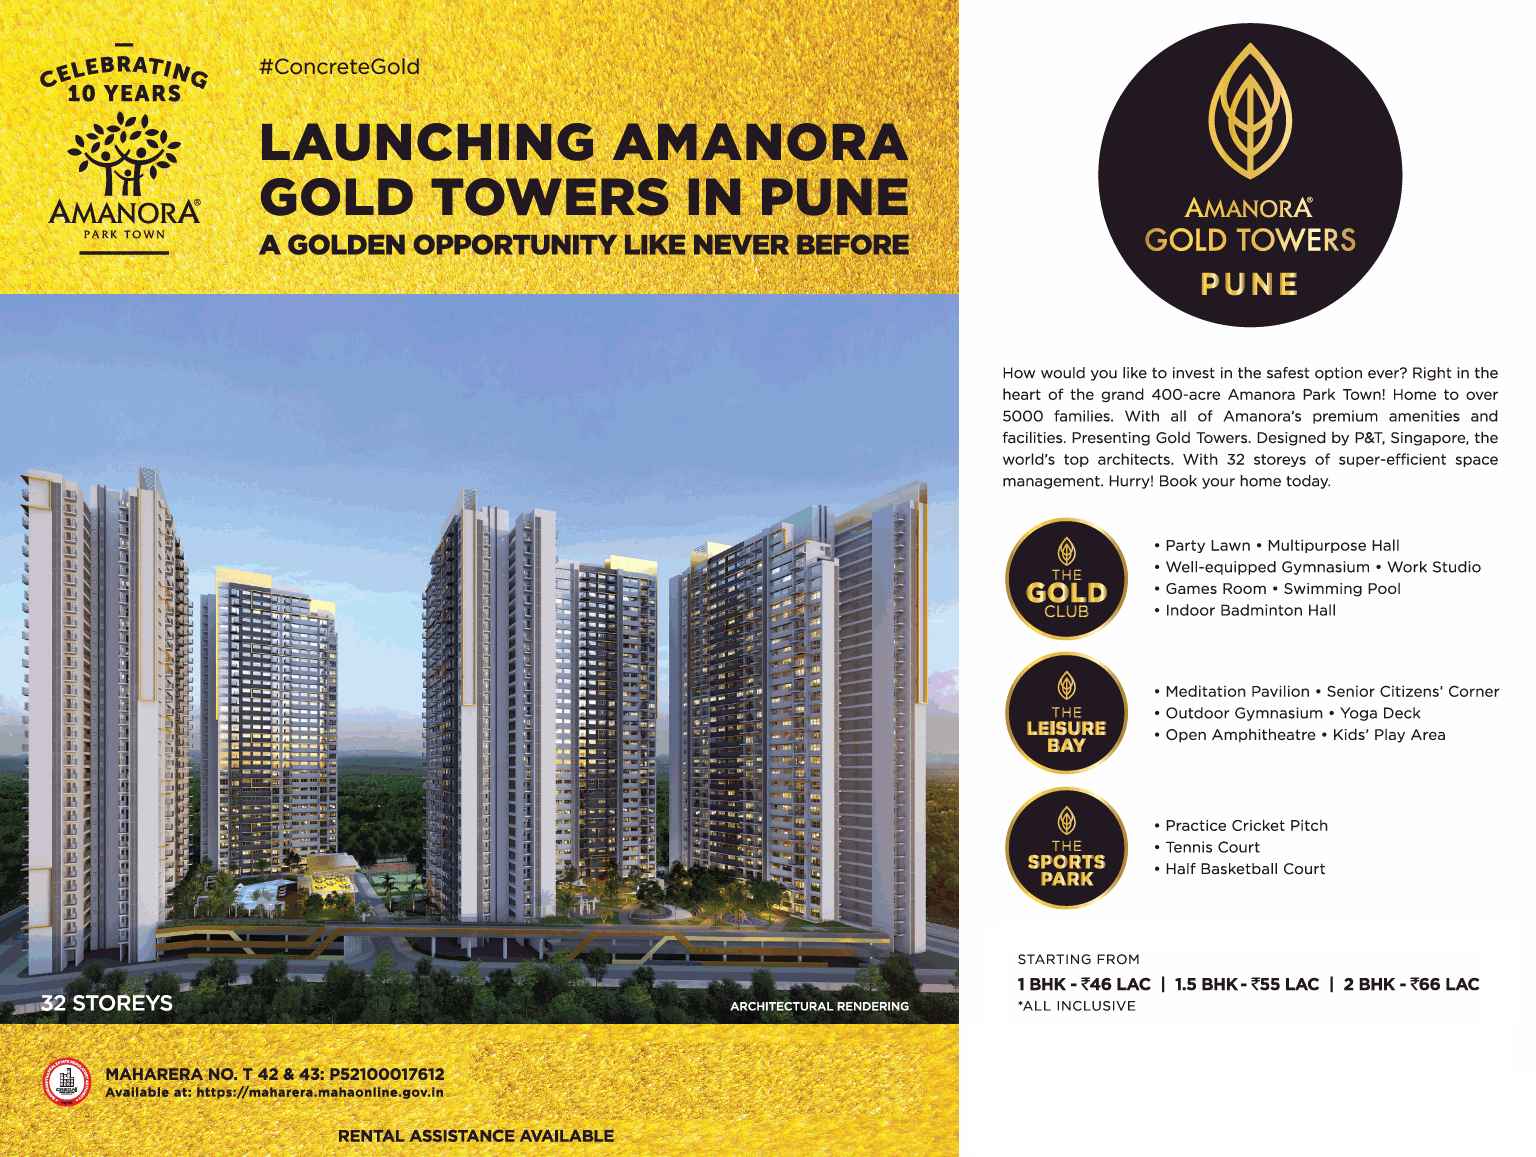 Launching Amanora Gold Towers in Pune Update